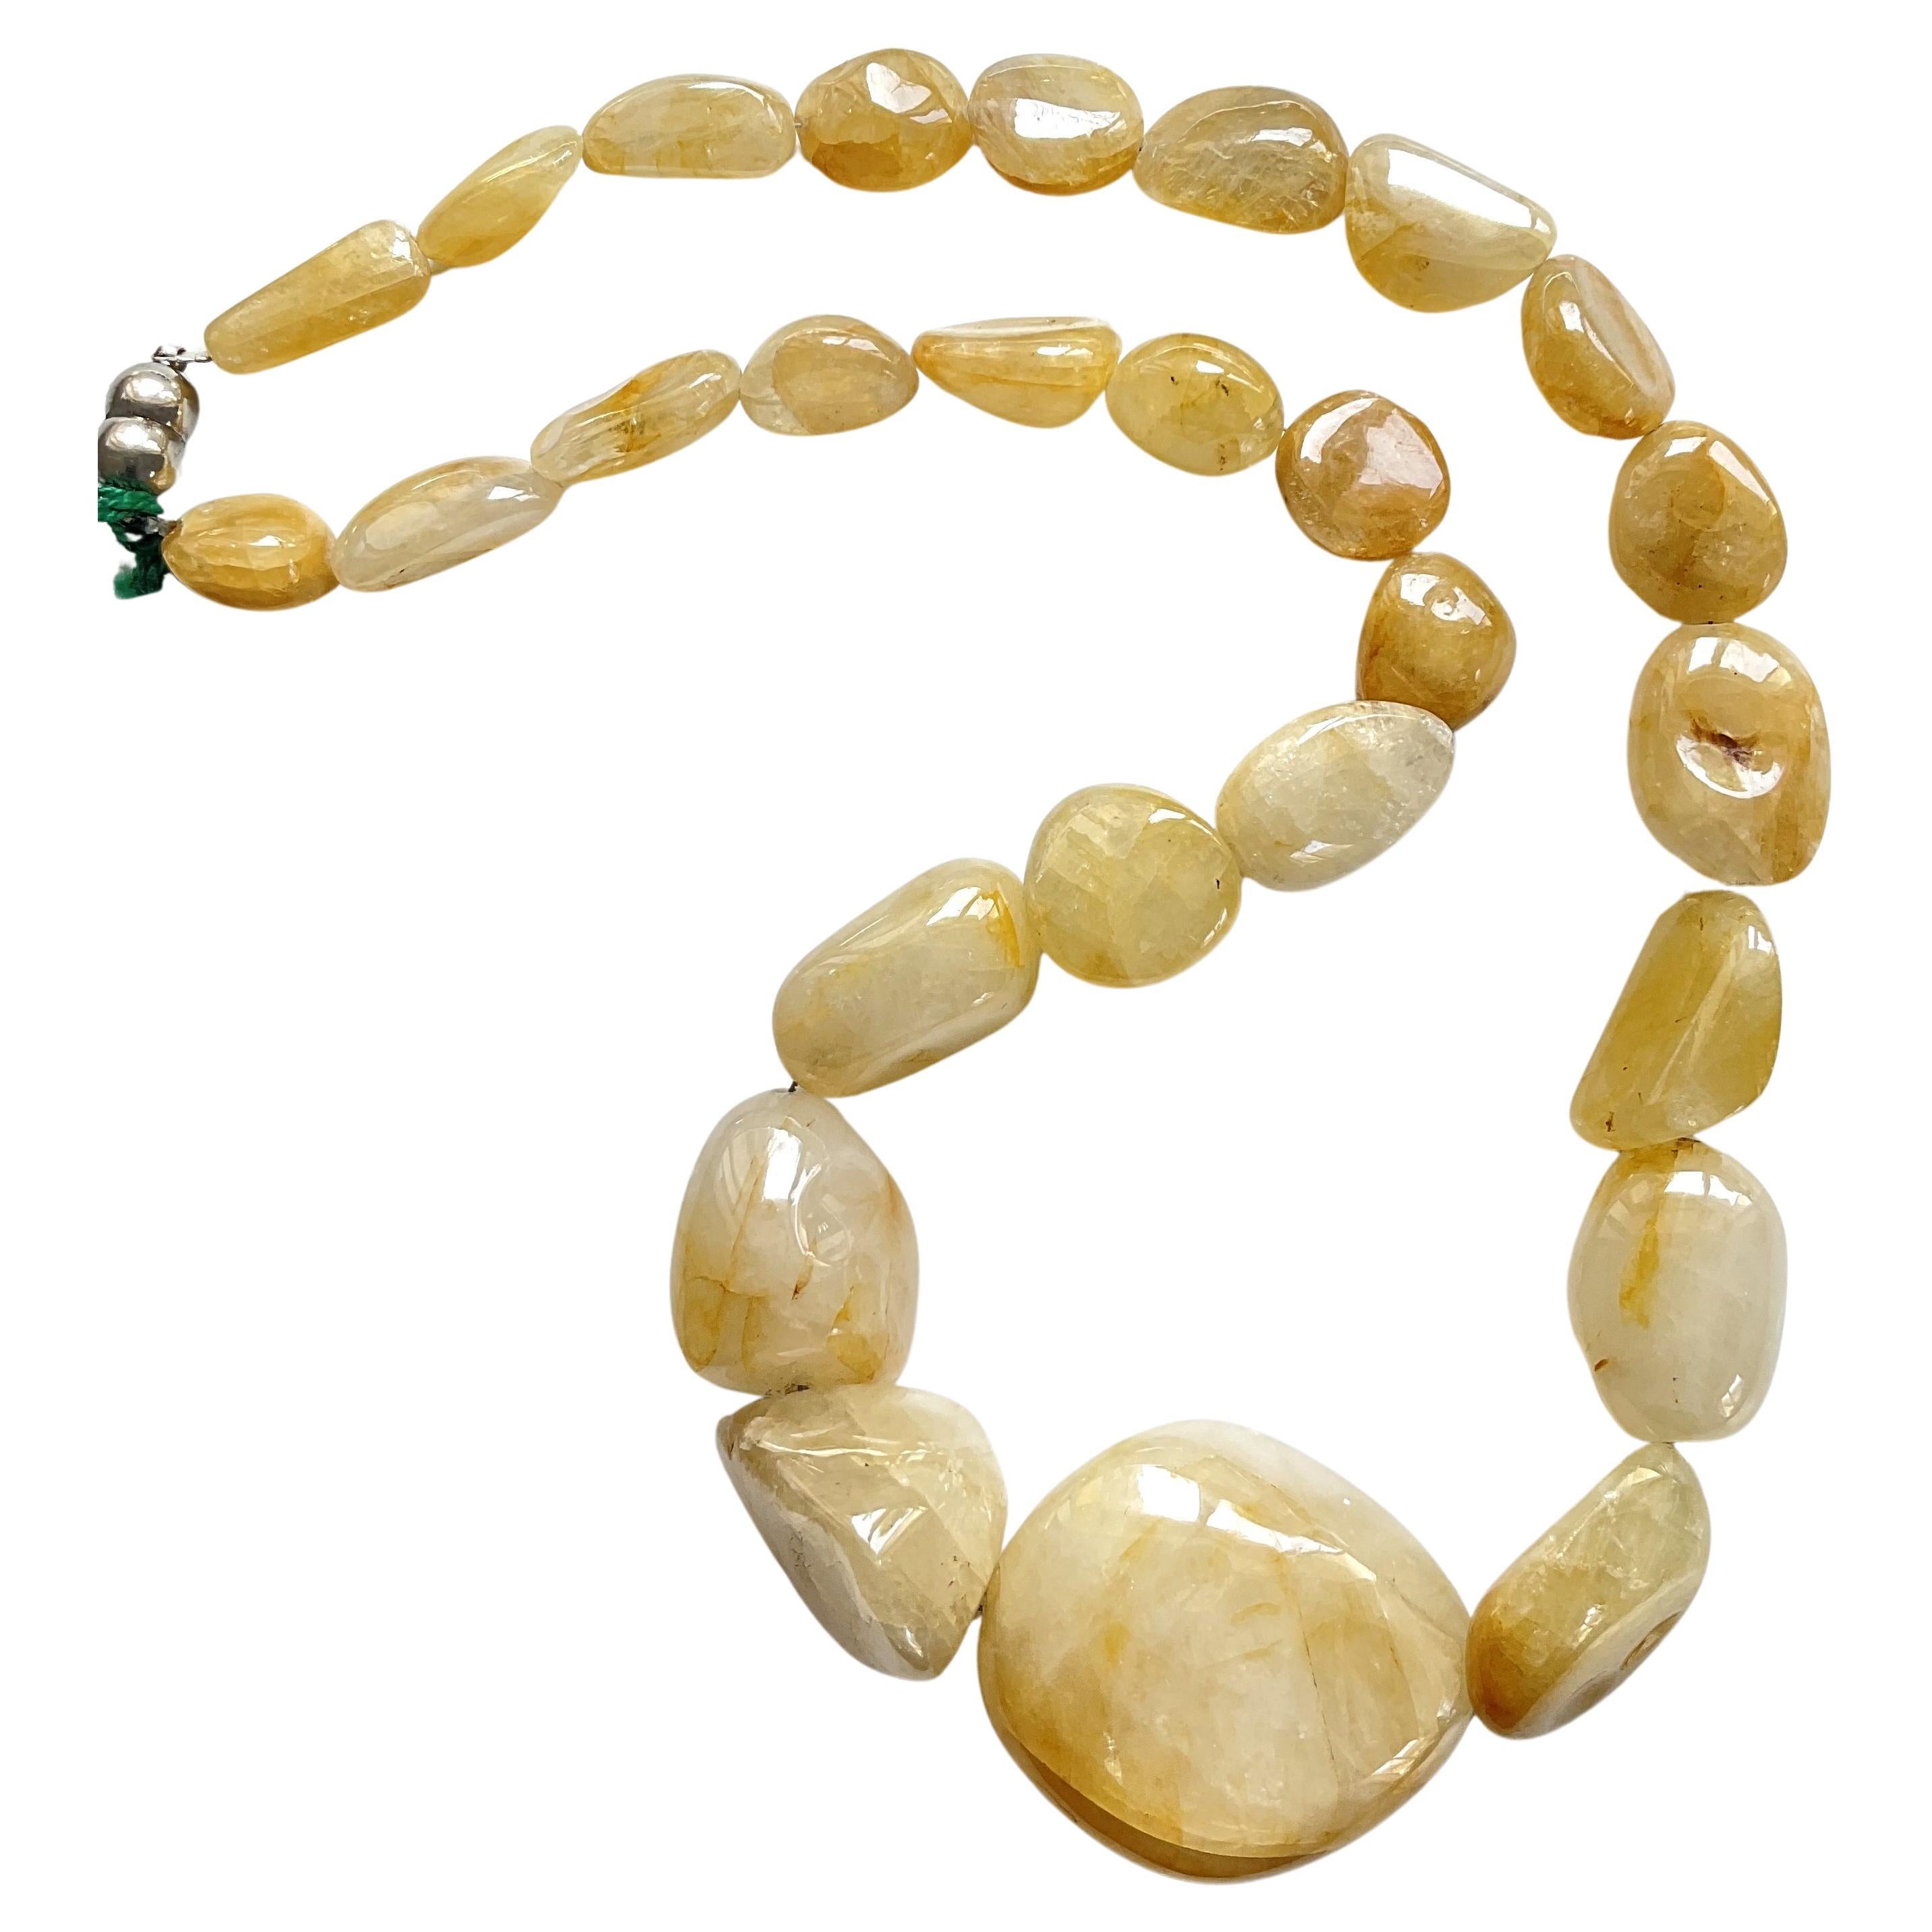 1111.20 Carats Big Size Yellow Sapphire Plain Tumbled Natural Gemstone Necklace For Sale